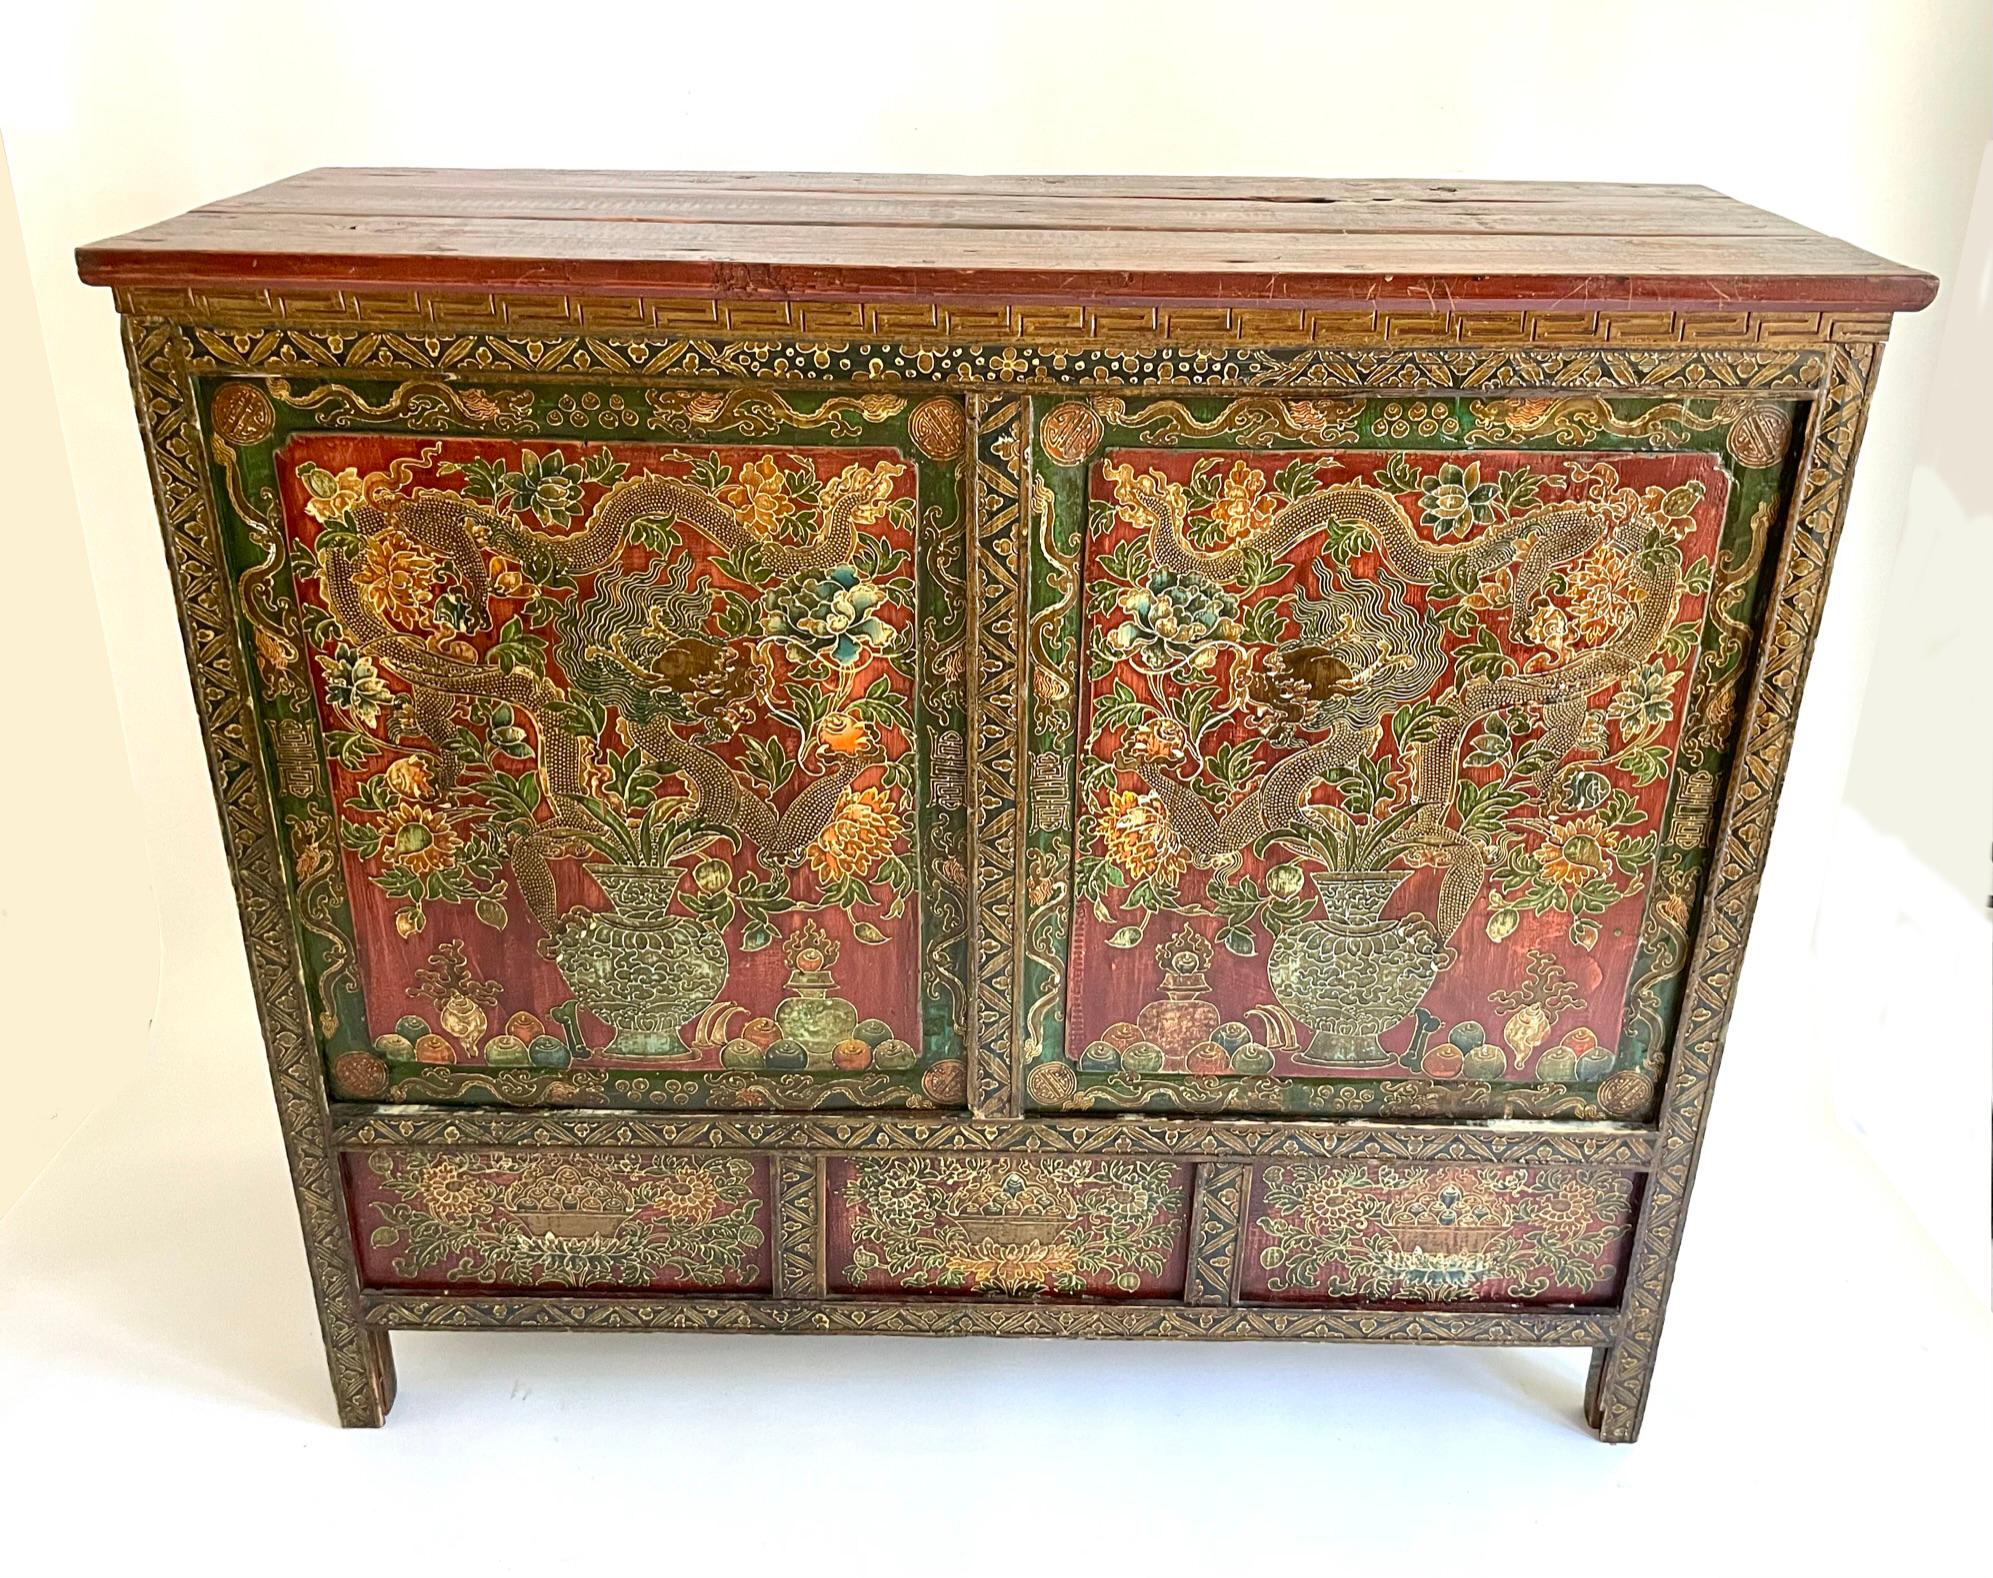 This 2 panel cabinet is beautifully painted with a pair of dragons, vases and lotus blossoms adoring both the front doors. Both sides of the cabinet are painted with the same floral details as the front. The cabinet is hand carved and painted in the